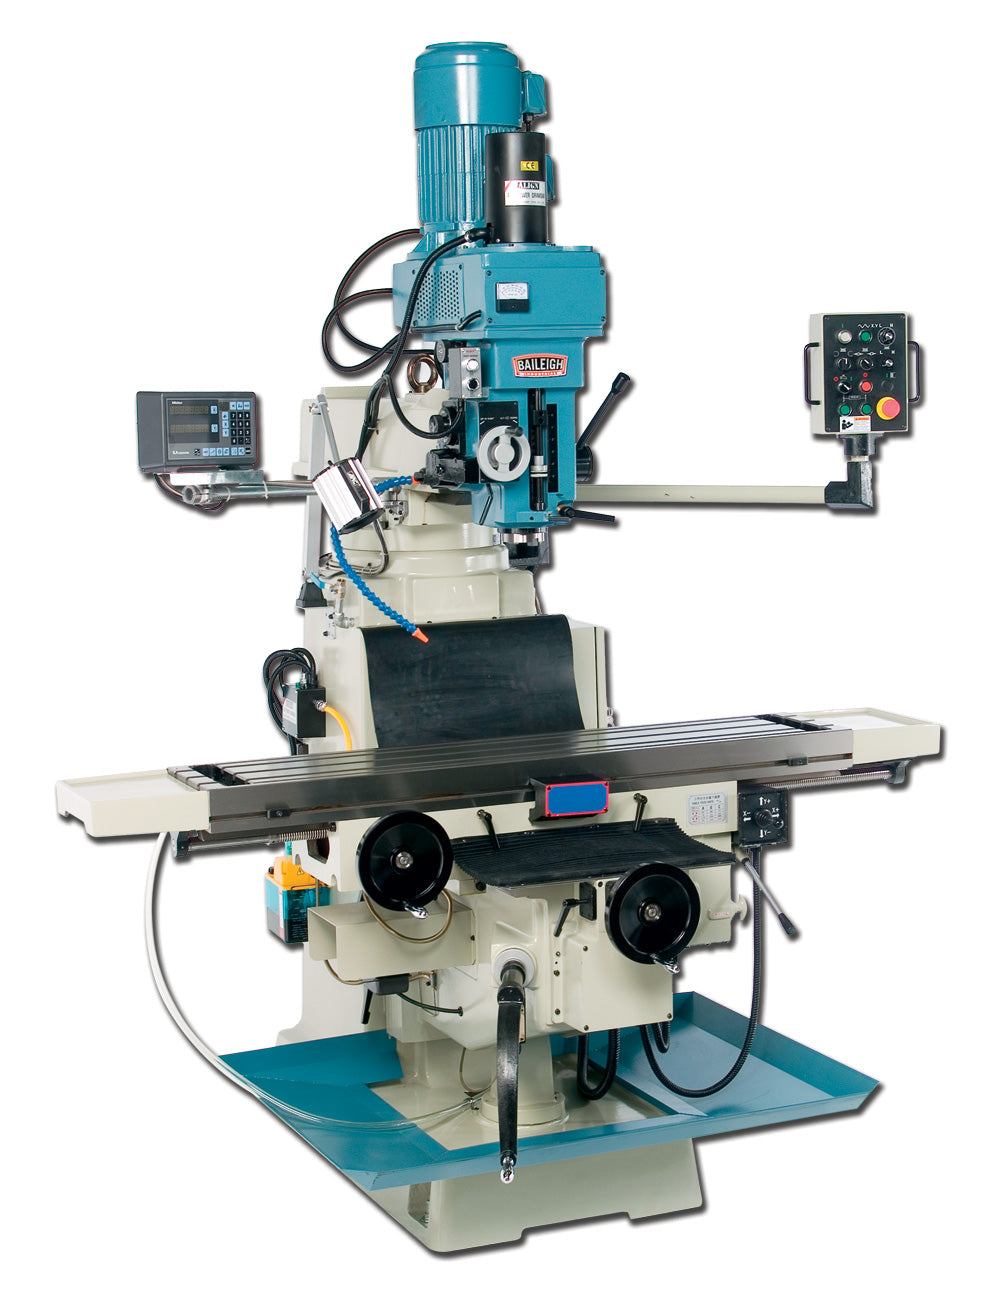 Baileigh VM-1258-3 220V 3 Phase Variable Speed Vertical Milling Machine with Rigid Head 12" x 58" Table